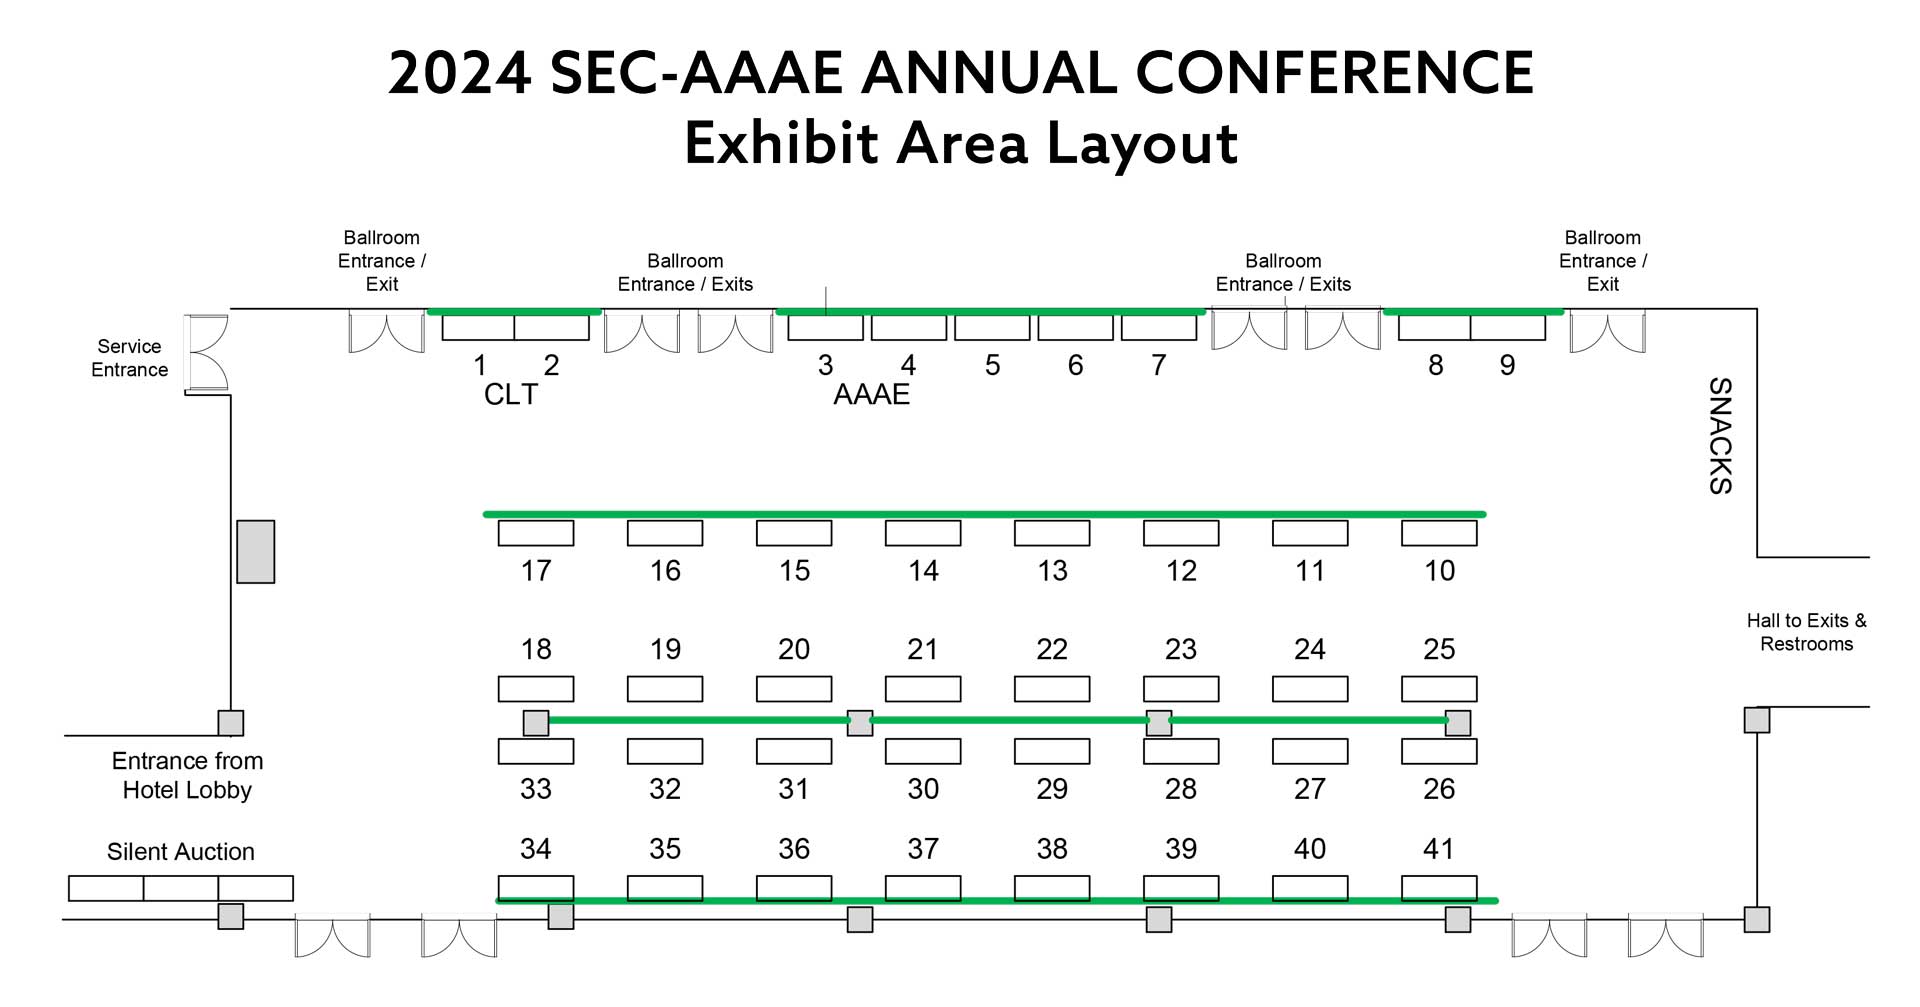 Exhibition Area Layout SECAAAE Annual Conference